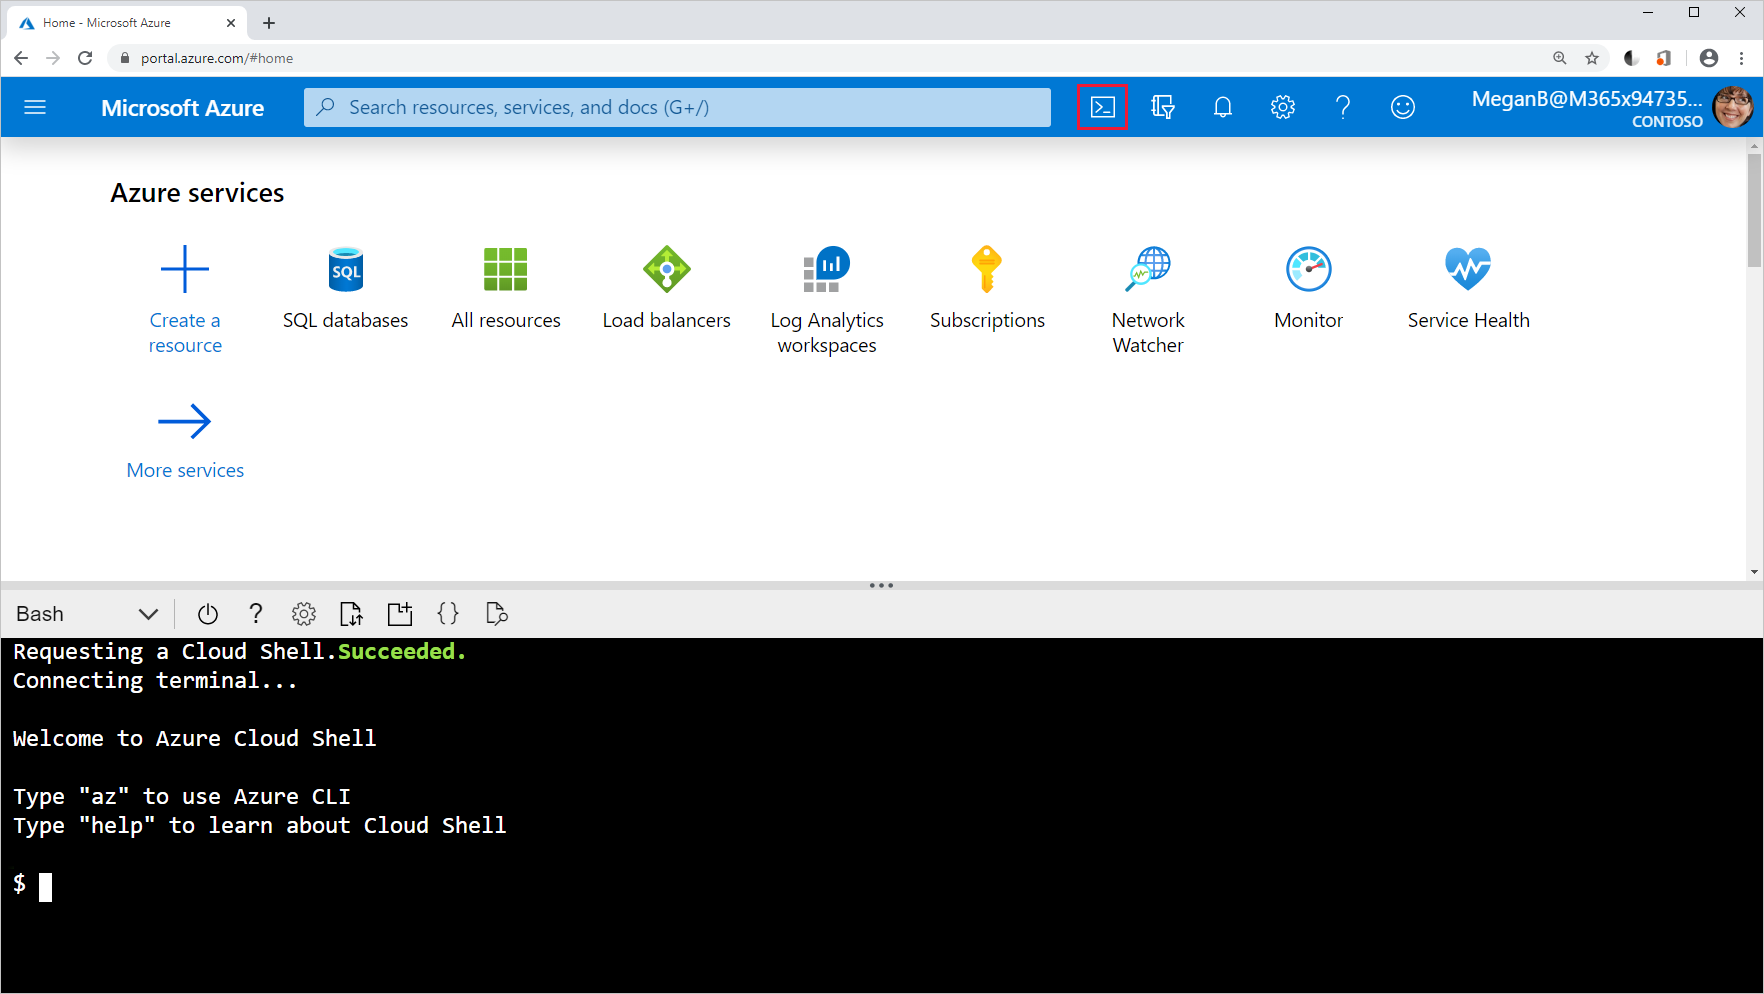 Screenshot of the Cloud Shell icon in the Azure portal.